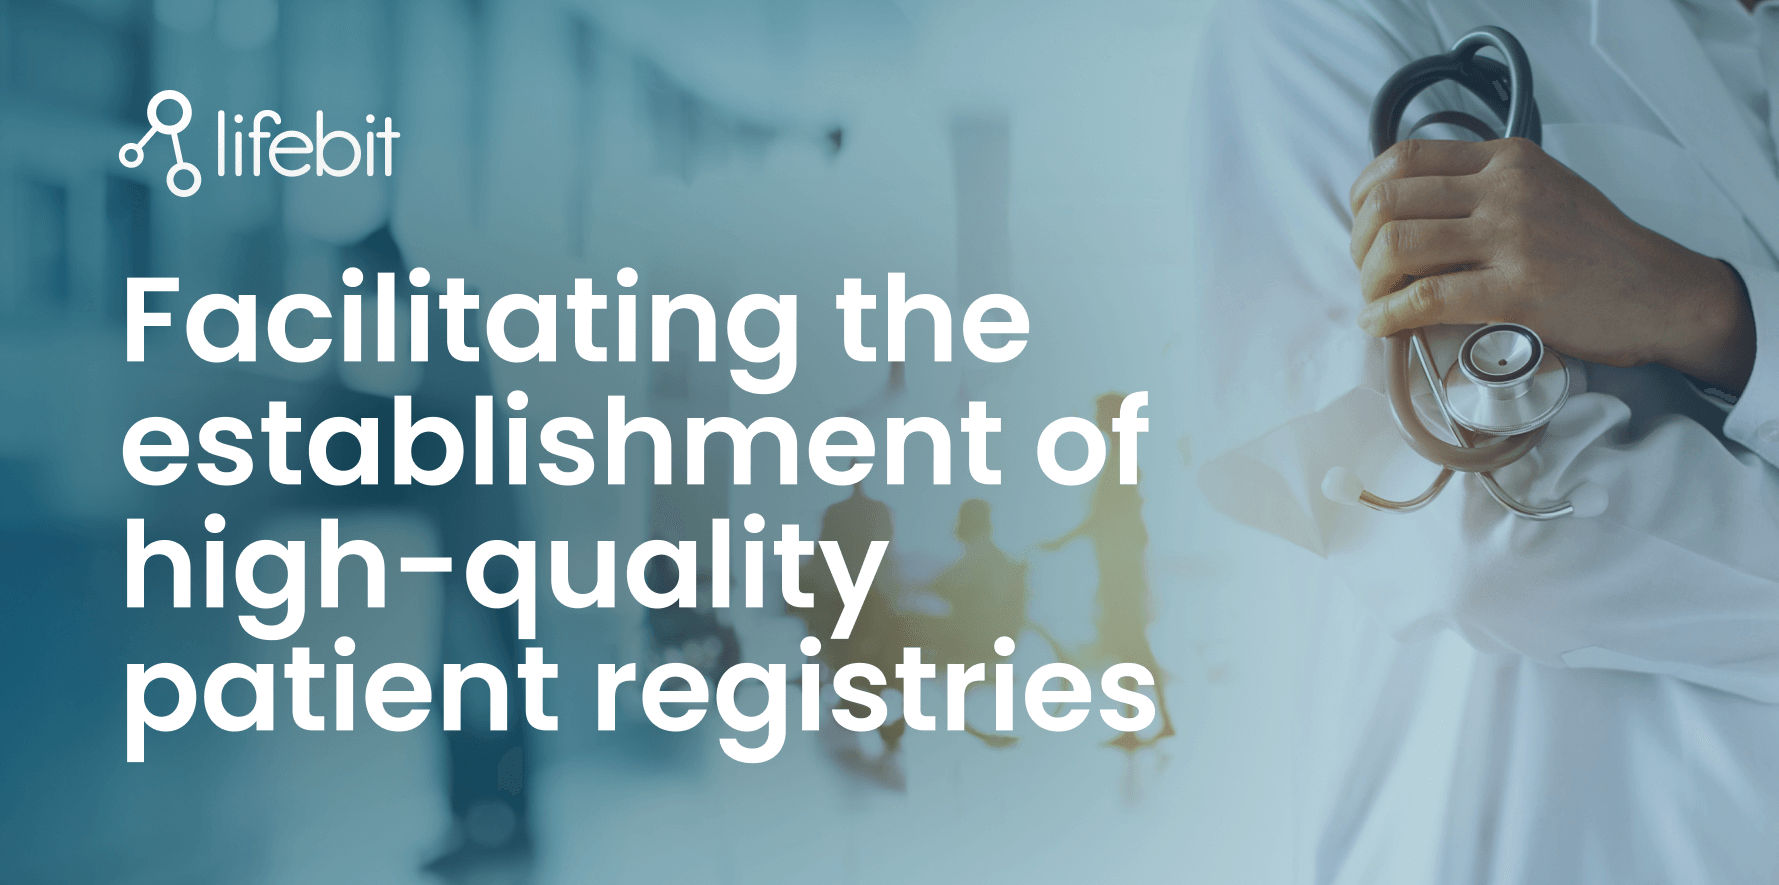 Data standardization brings multiple benefits in patient registries, including increased data interoperability to maximize research outputs.